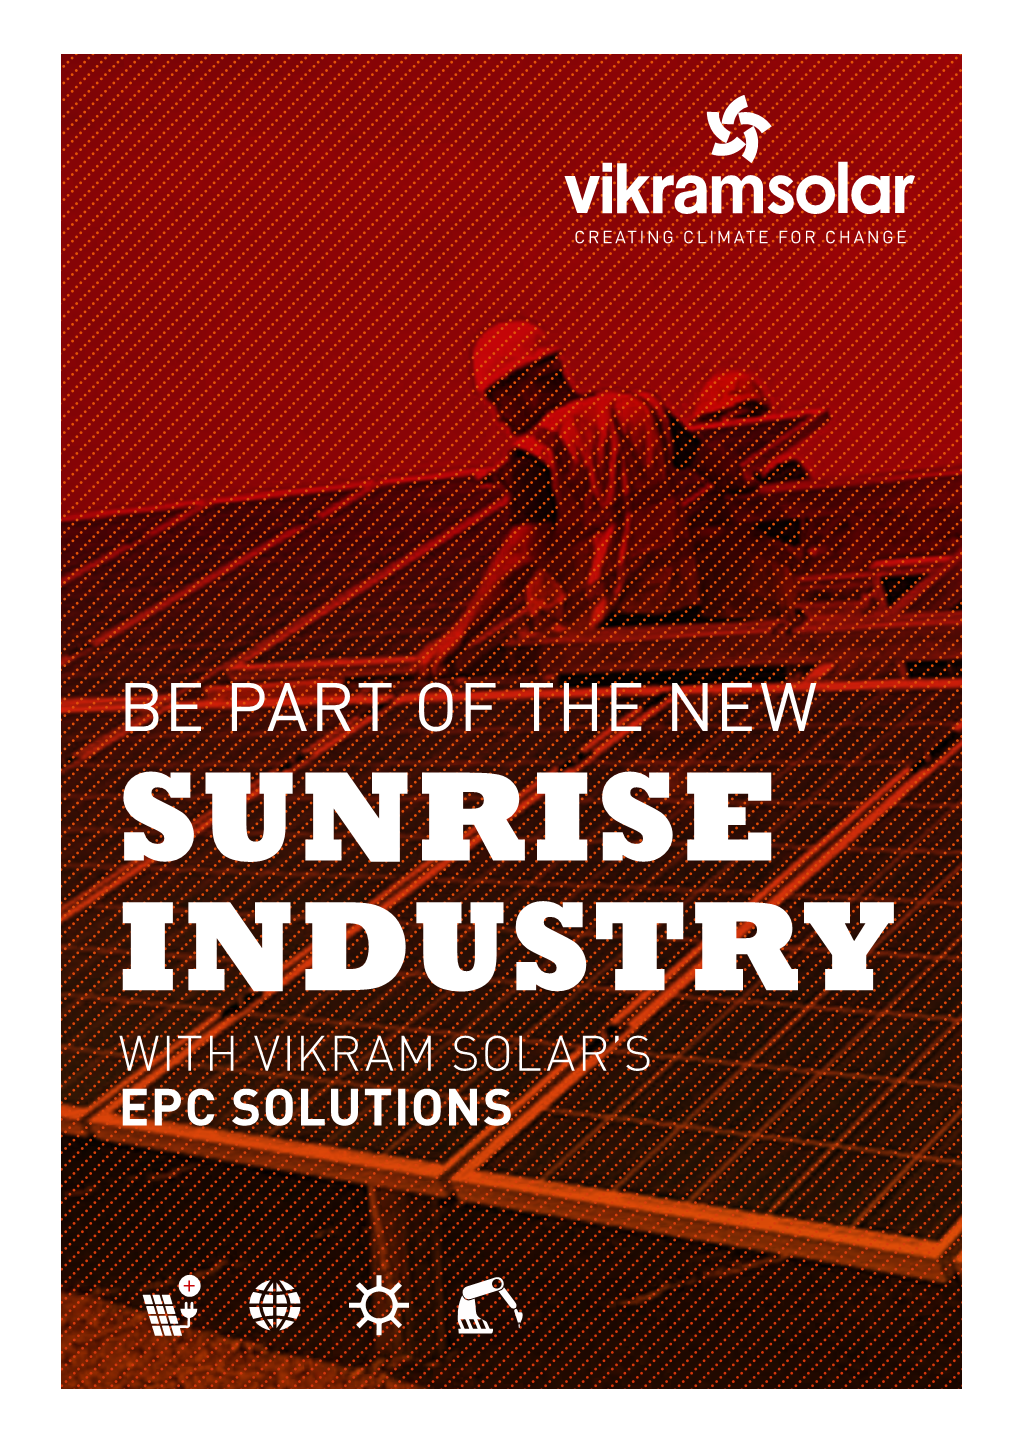 Epc Solutions